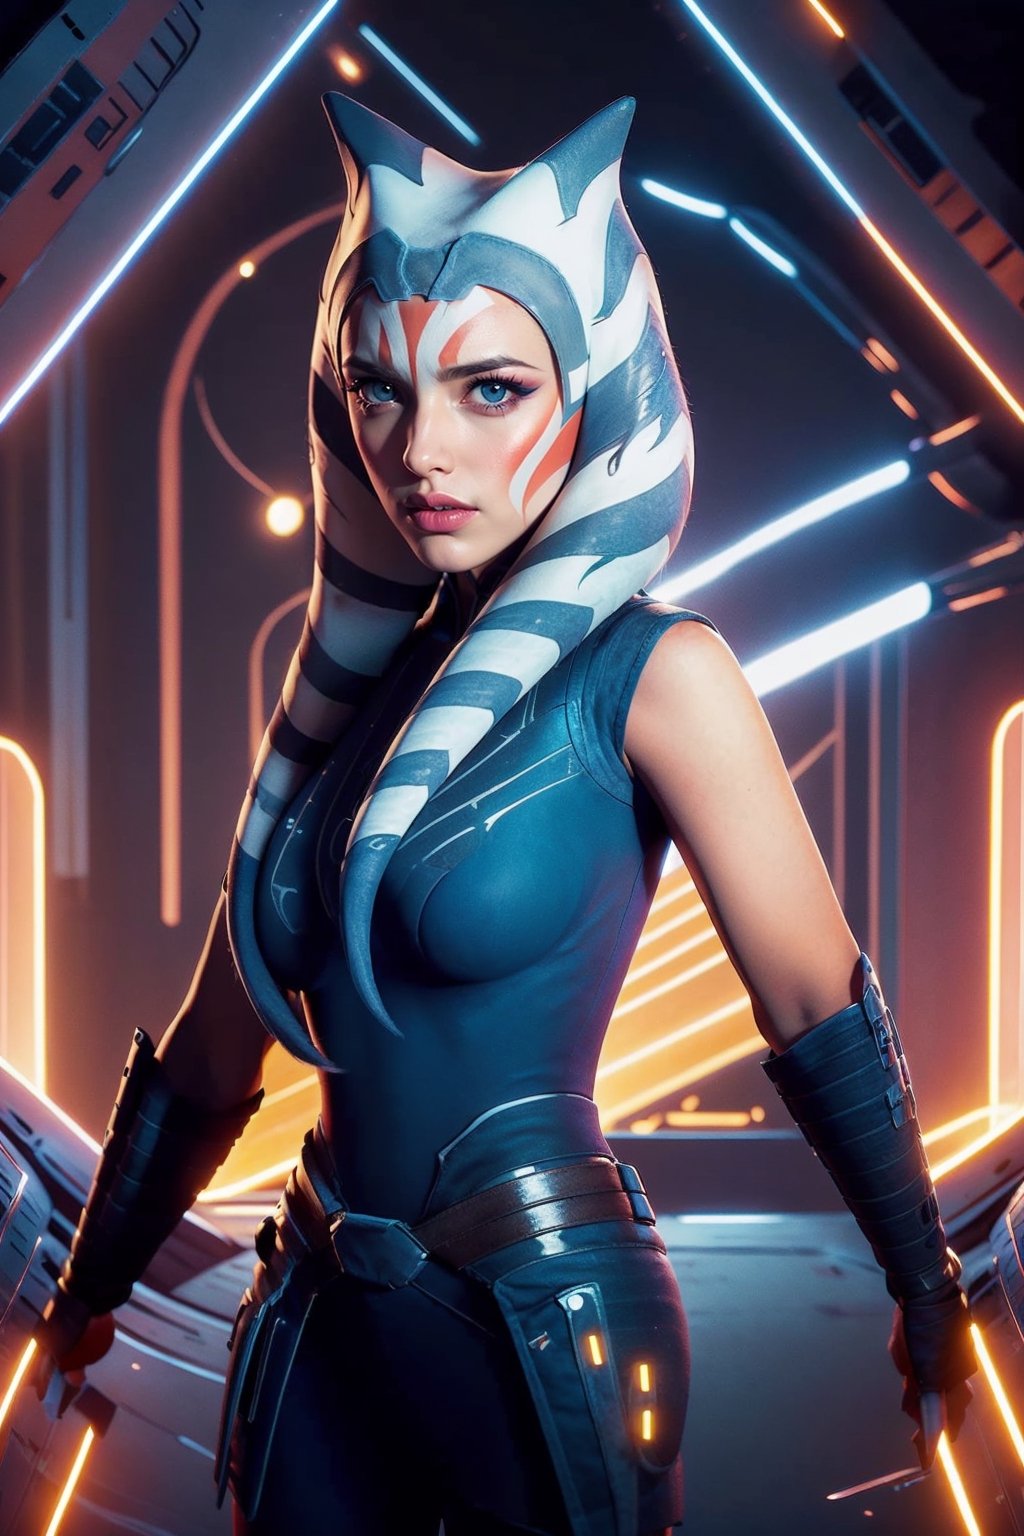 intense make-up, intense make-up colors, big breasts, 
Woman. Oval face. 
ahsoka face make-up
outfit with golden and neon intricate futuristic details,hourglass body shape,Futuristic room, ahsokatano